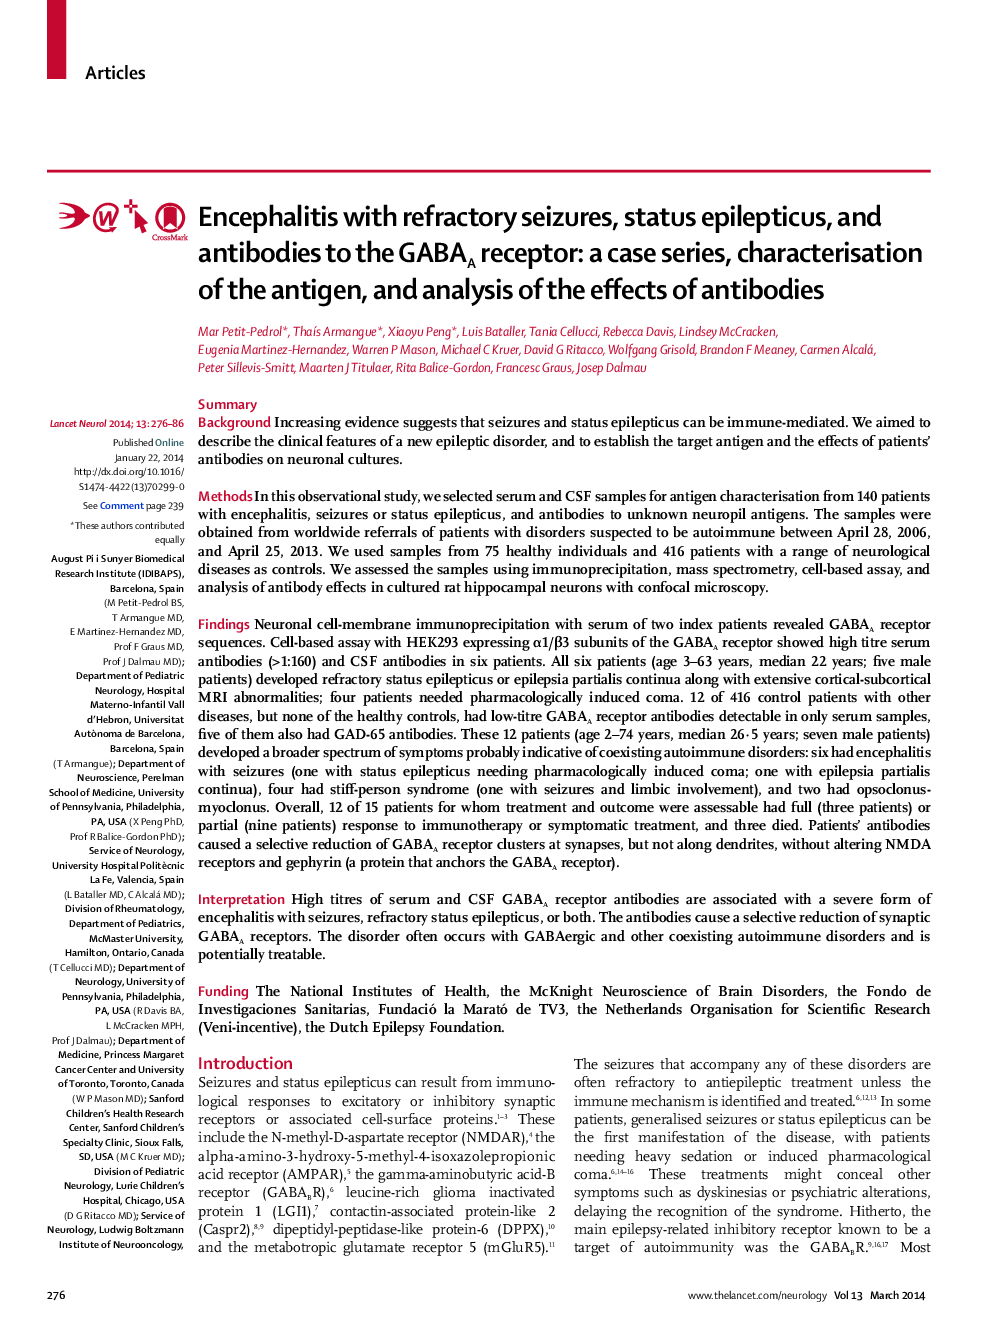 Encephalitis with refractory seizures, status epilepticus, and antibodies to the GABAA receptor: a case series, characterisation of the antigen, and analysis of the effects of antibodies